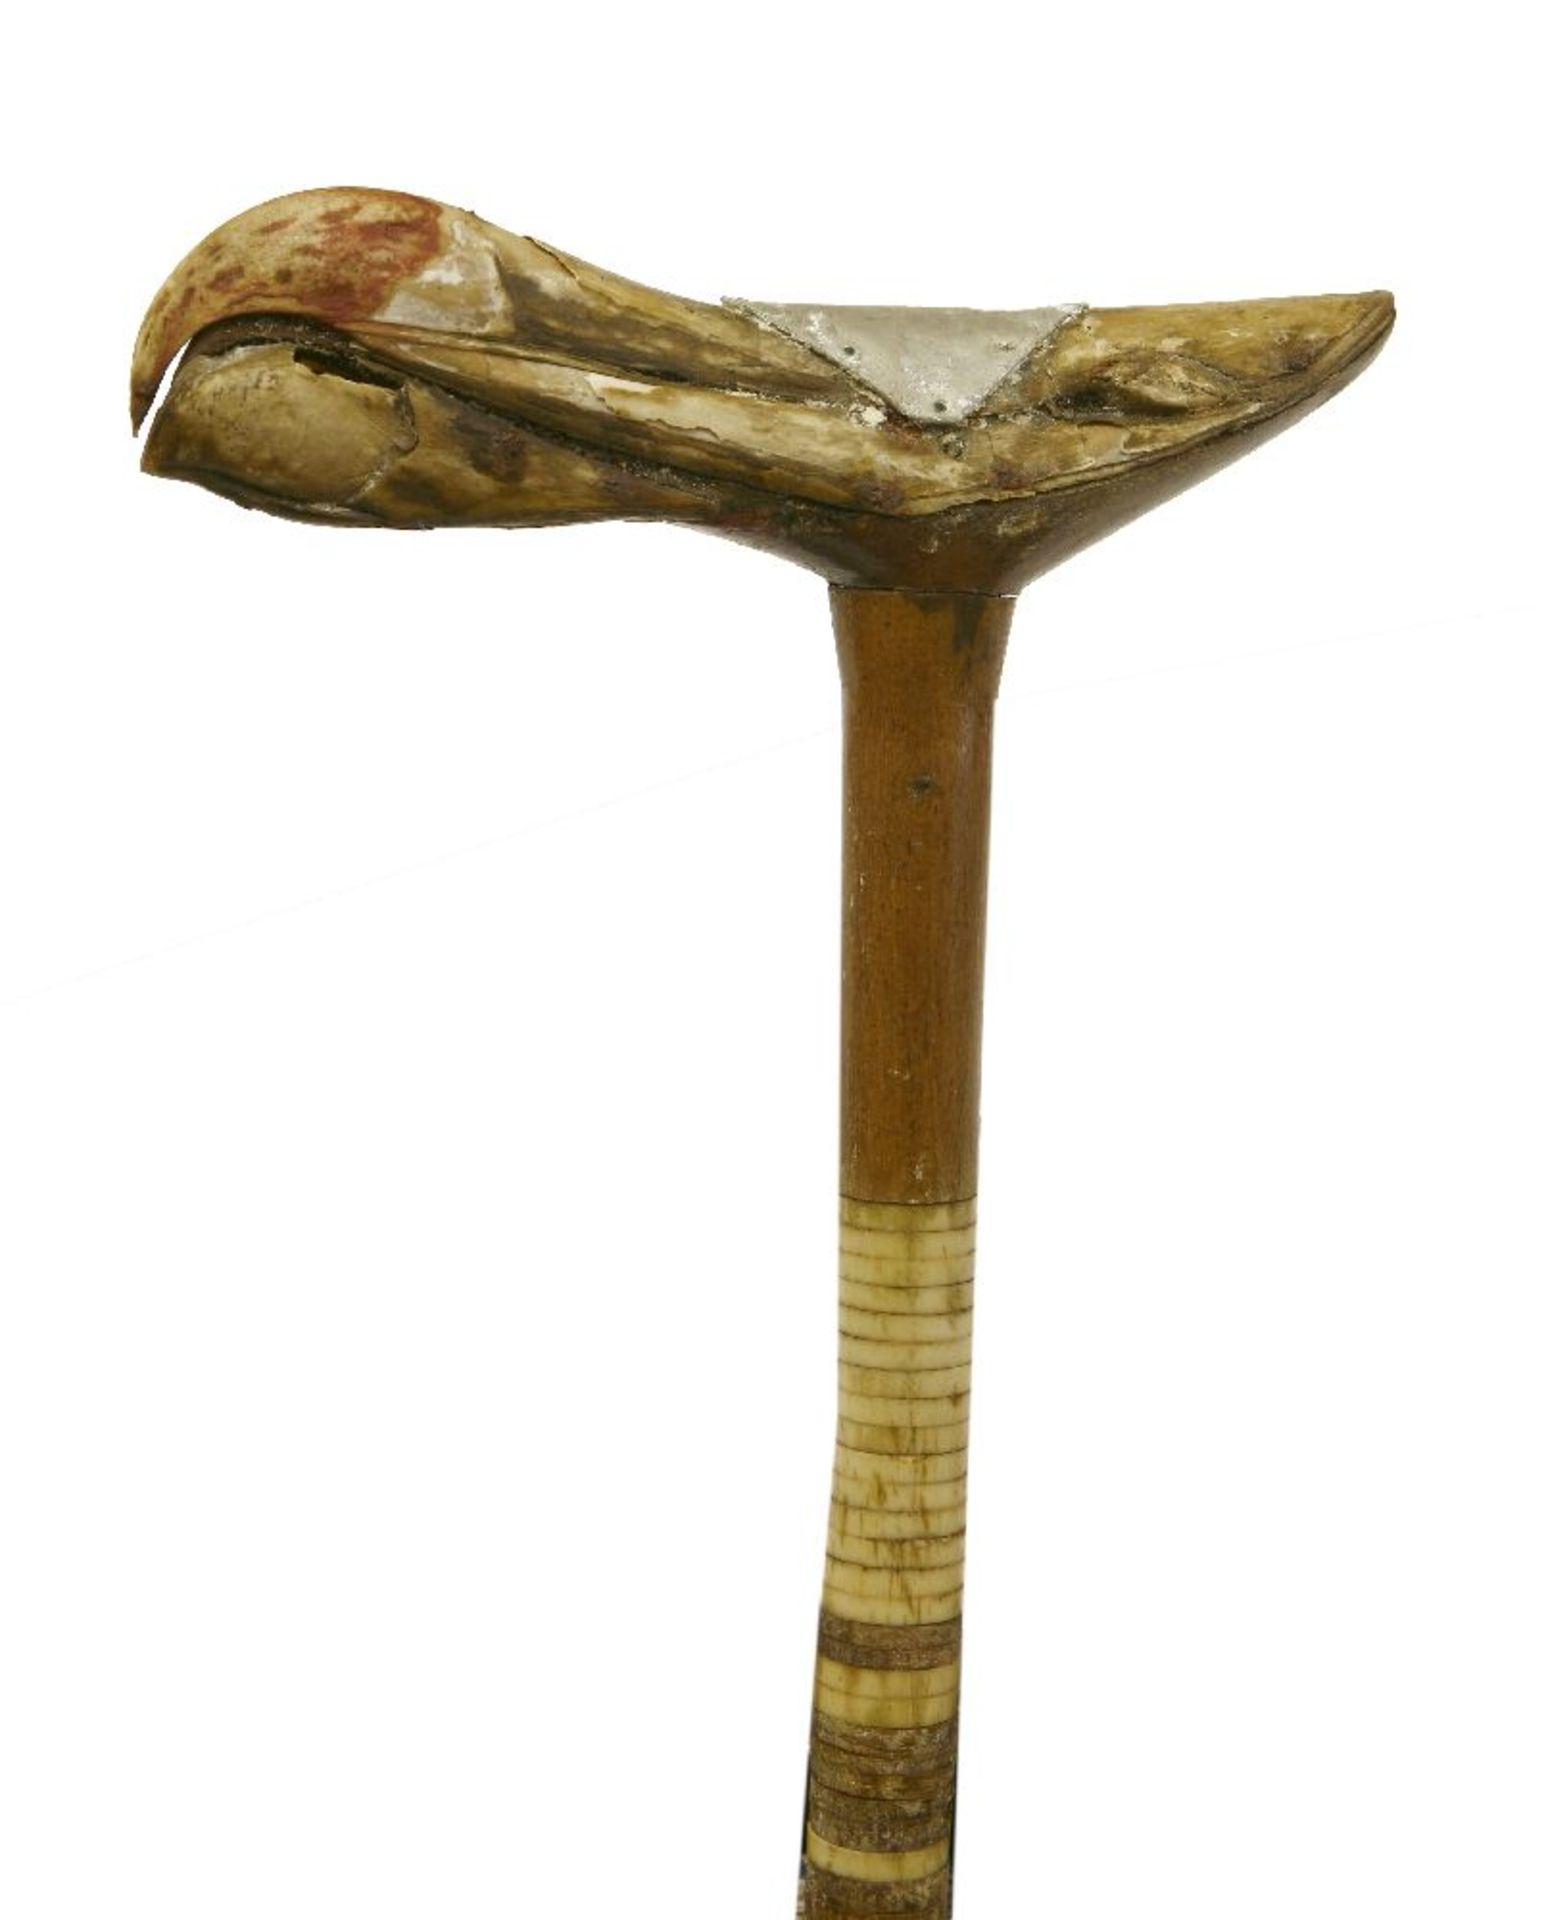 An unusual whaler's walking stick,the handle formed by the beak of an albatross secured by an